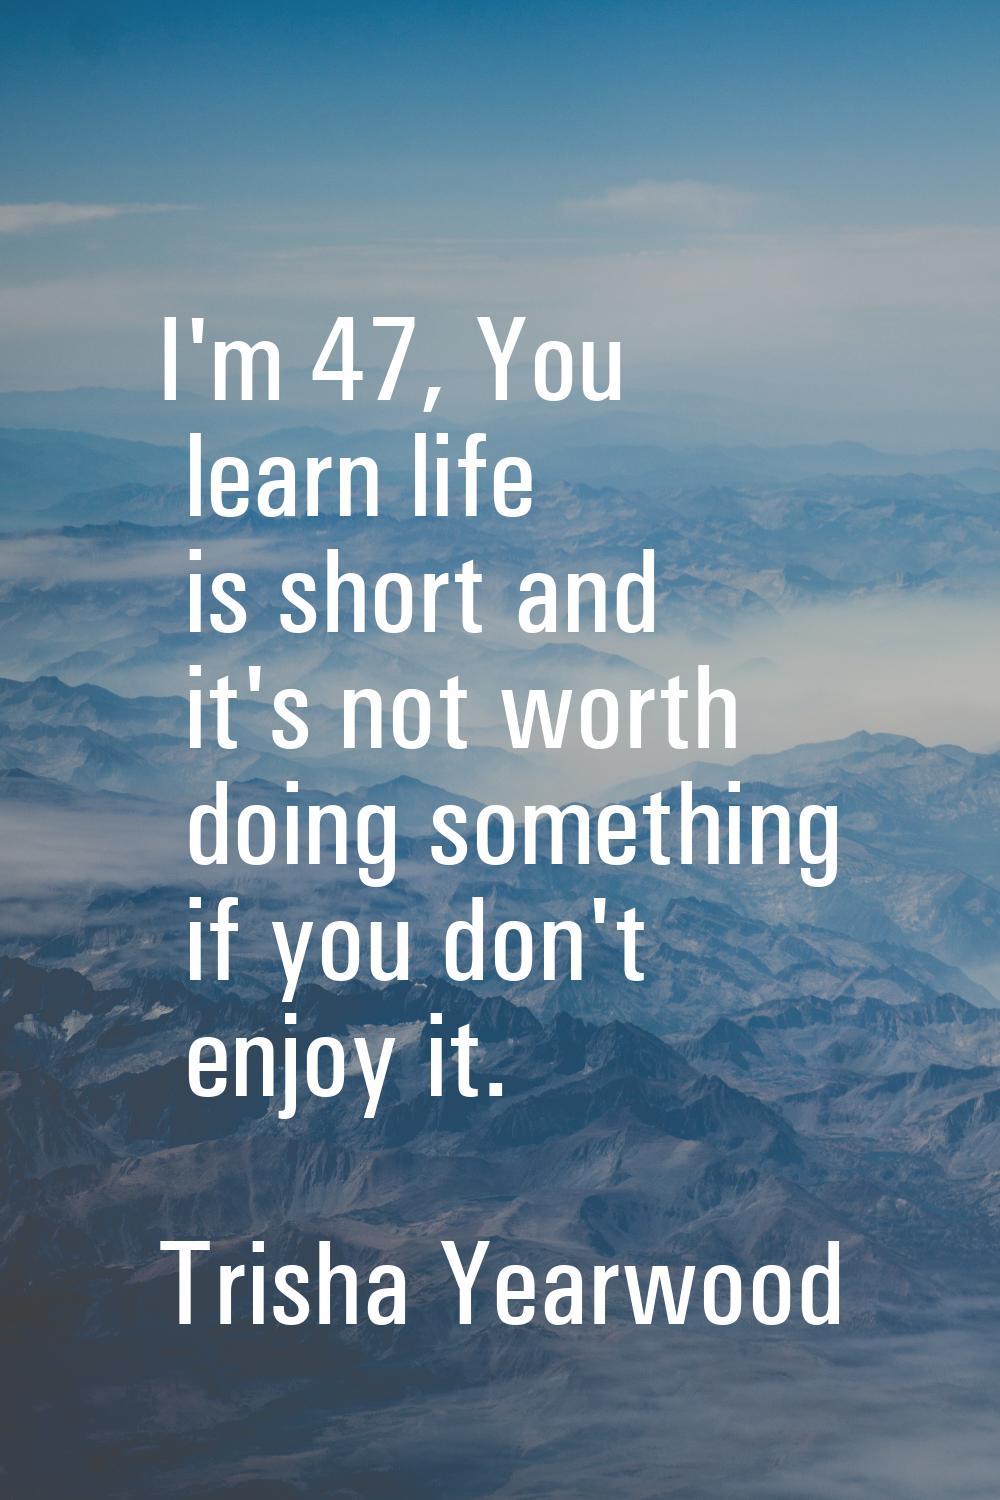 I'm 47, You learn life is short and it's not worth doing something if you don't enjoy it.